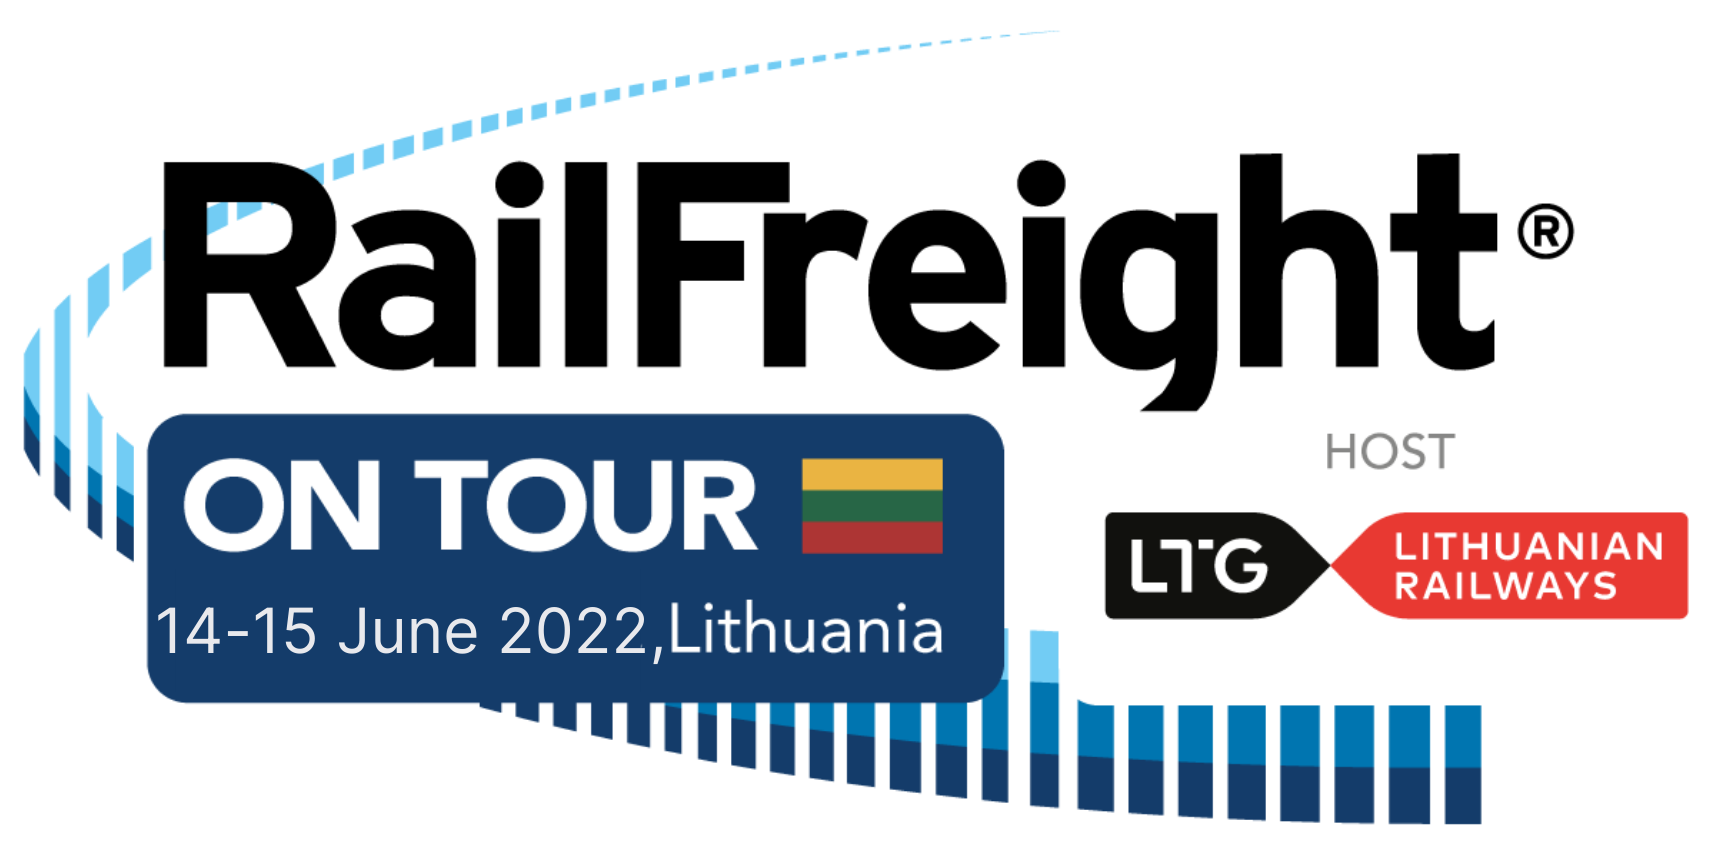 RailFreight on Tour - The Lithuanian Edition